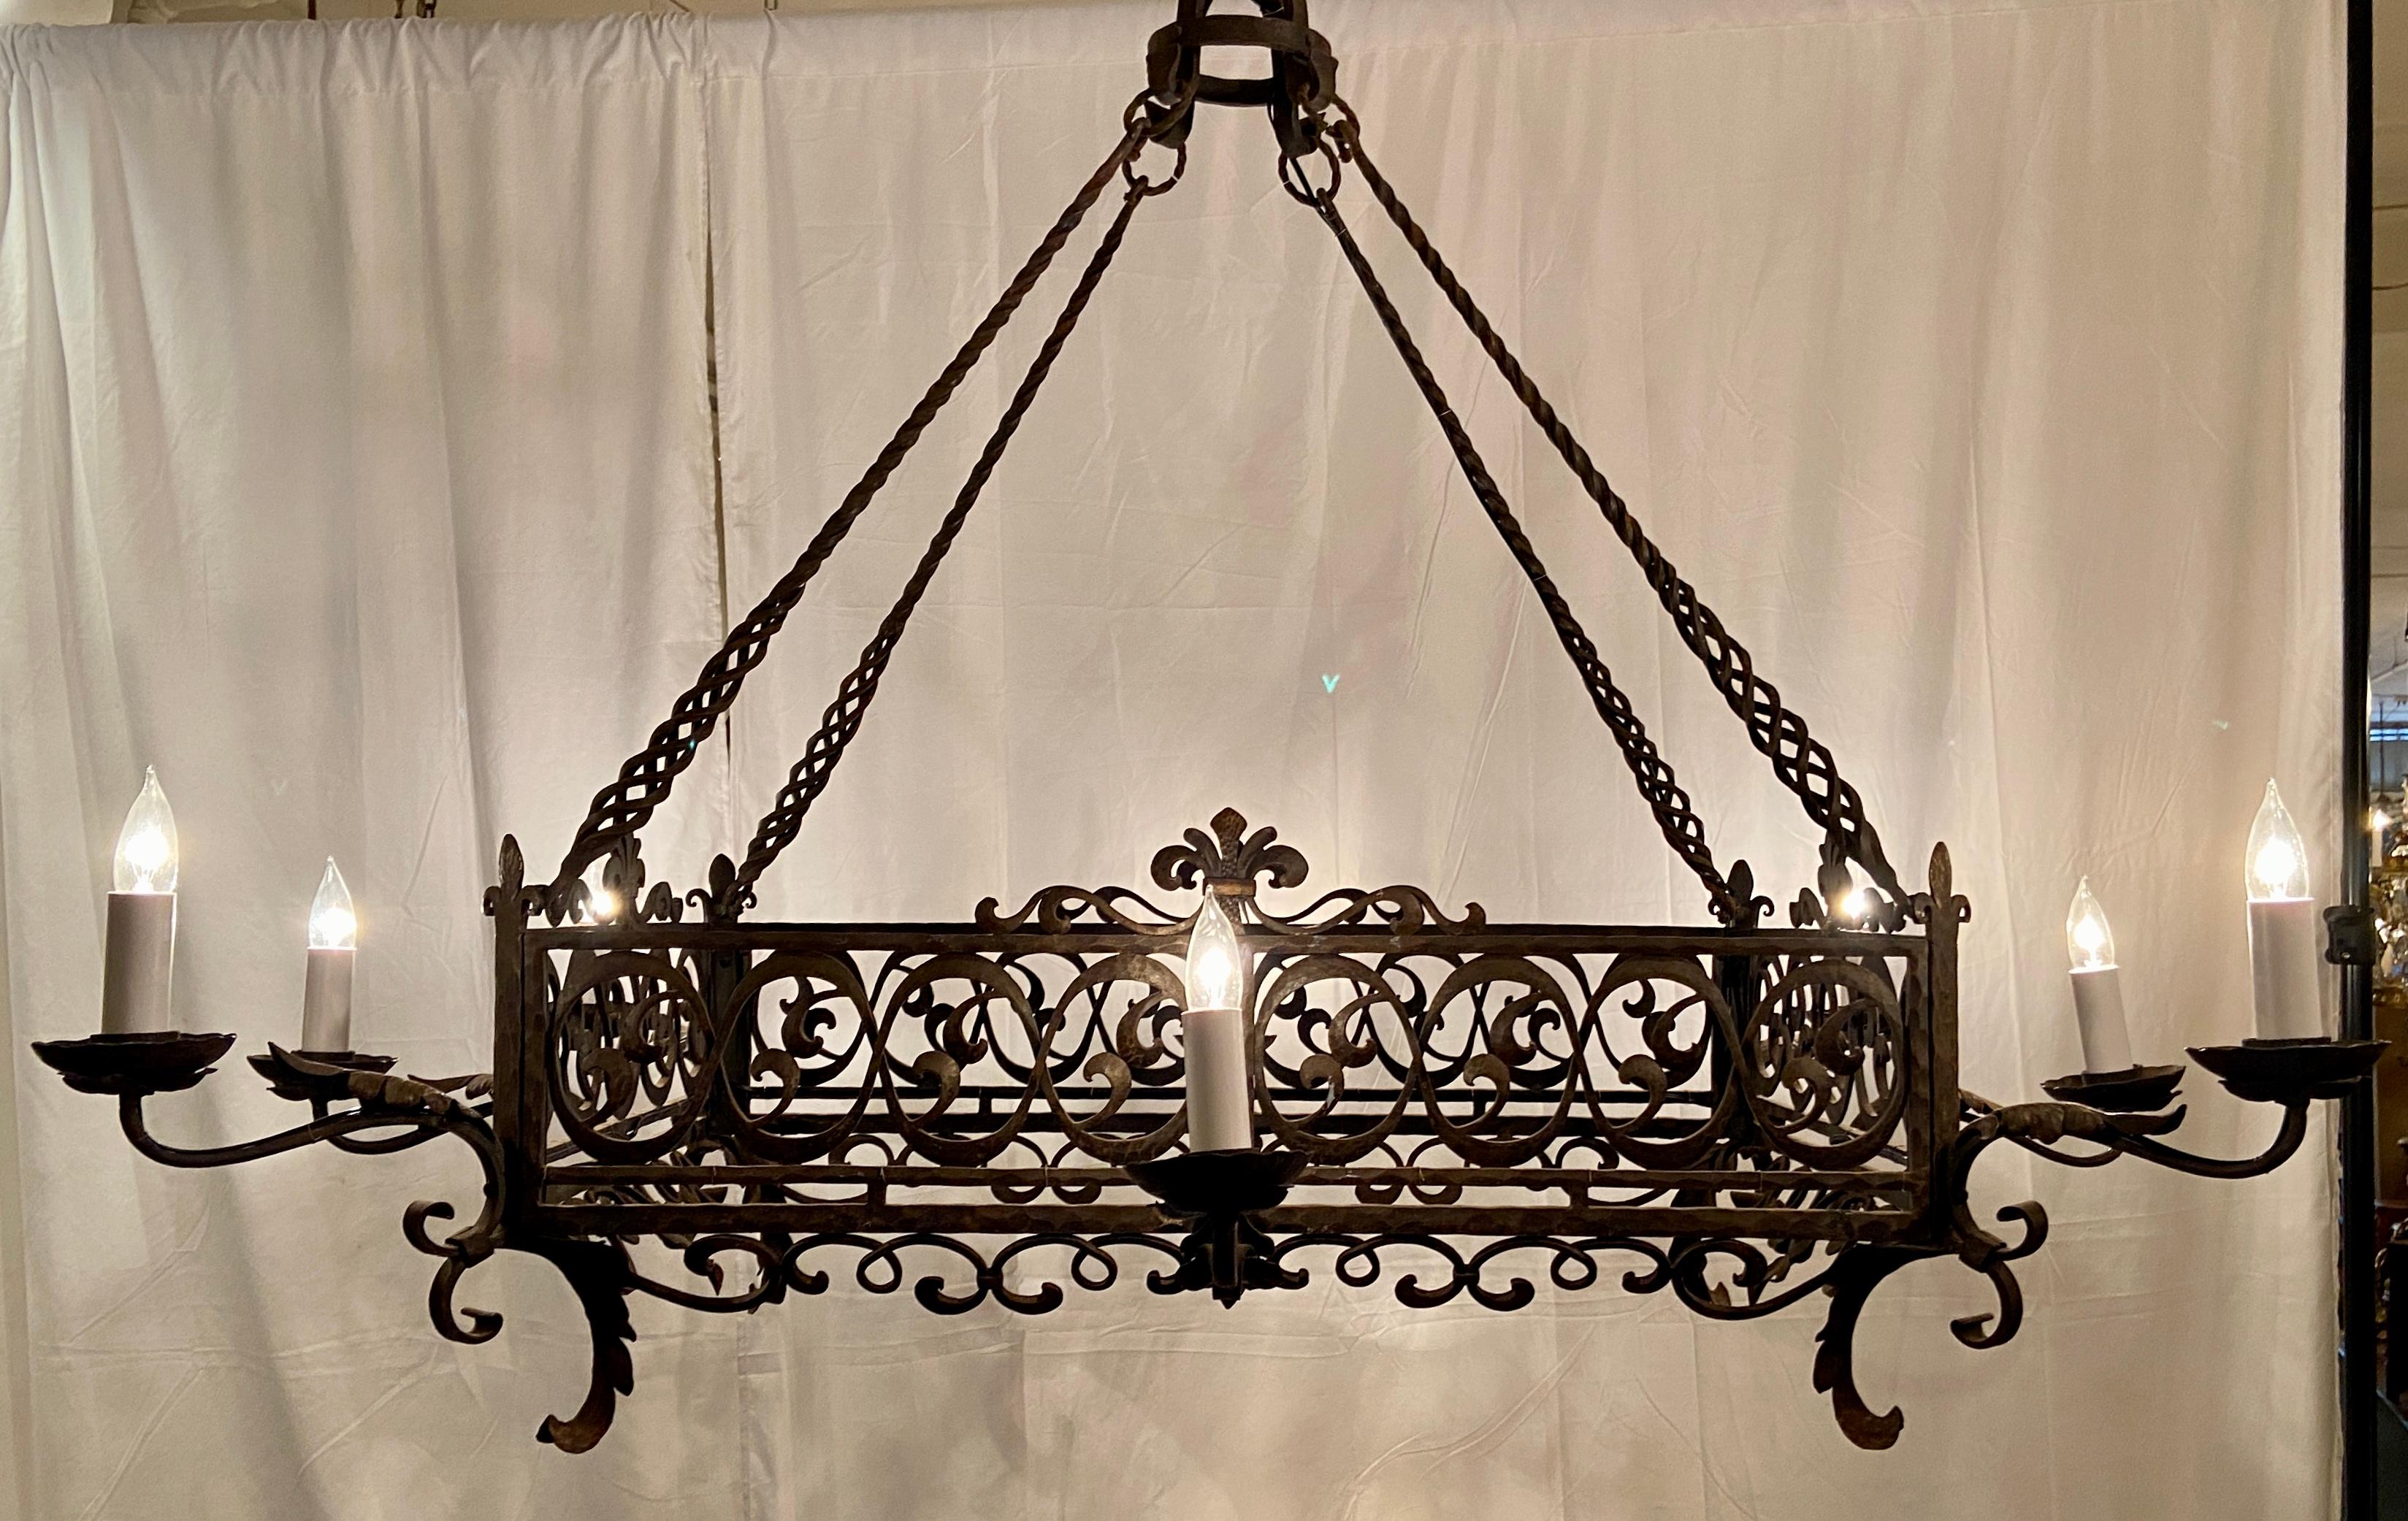 Antique 19th century French wrought iron chandelier, Circa 1890.